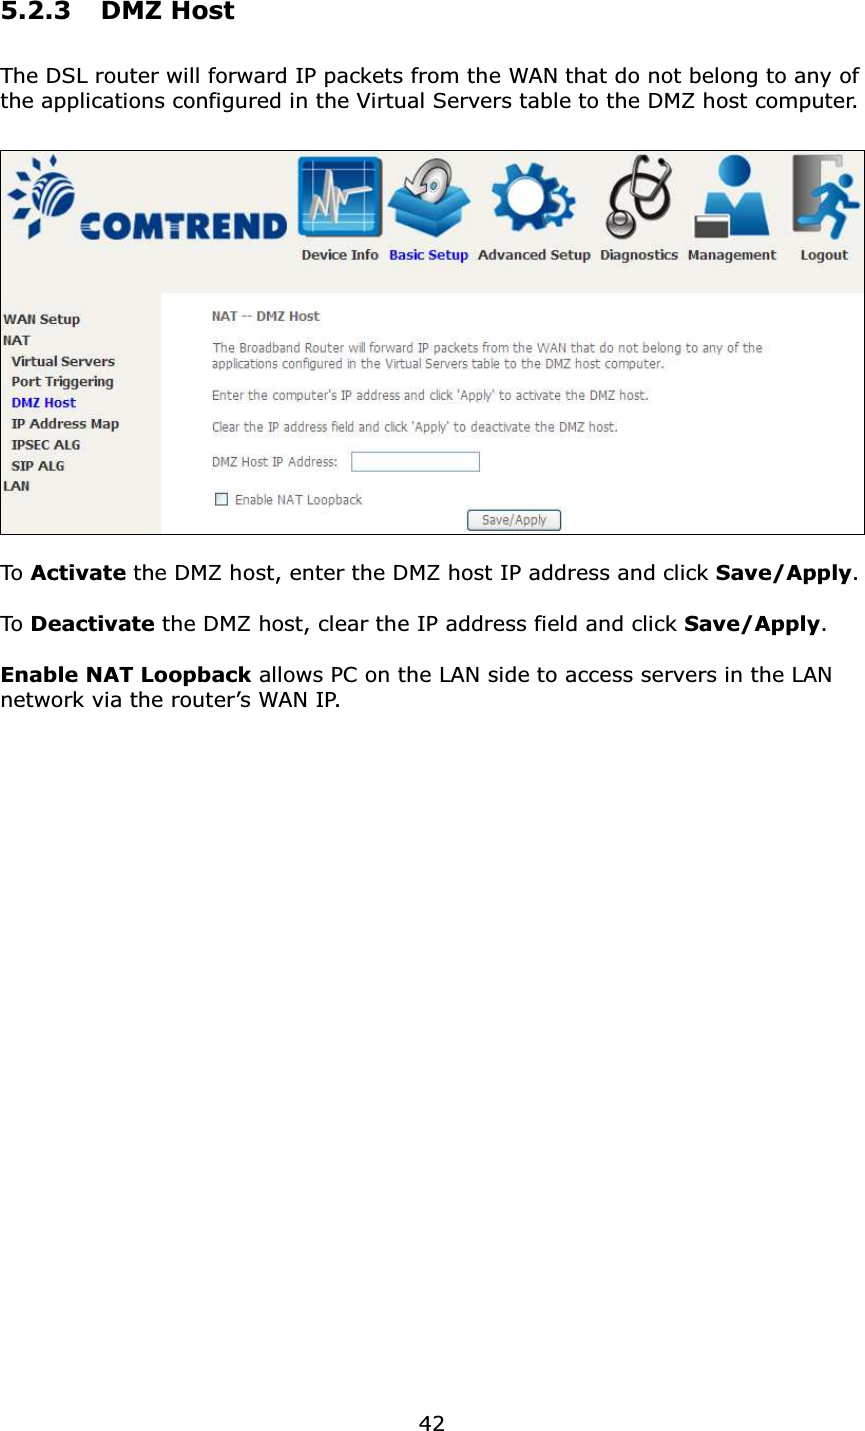  425.2.3 DMZ Host The DSL router will forward IP packets from the WAN that do not belong to any of the applications configured in the Virtual Servers table to the DMZ host computer.    To  Activate the DMZ host, enter the DMZ host IP address and click Save/Apply.  To Deactivate the DMZ host, clear the IP address field and click Save/Apply.  Enable NAT Loopback allows PC on the LAN side to access servers in the LAN network via the router’s WAN IP. 